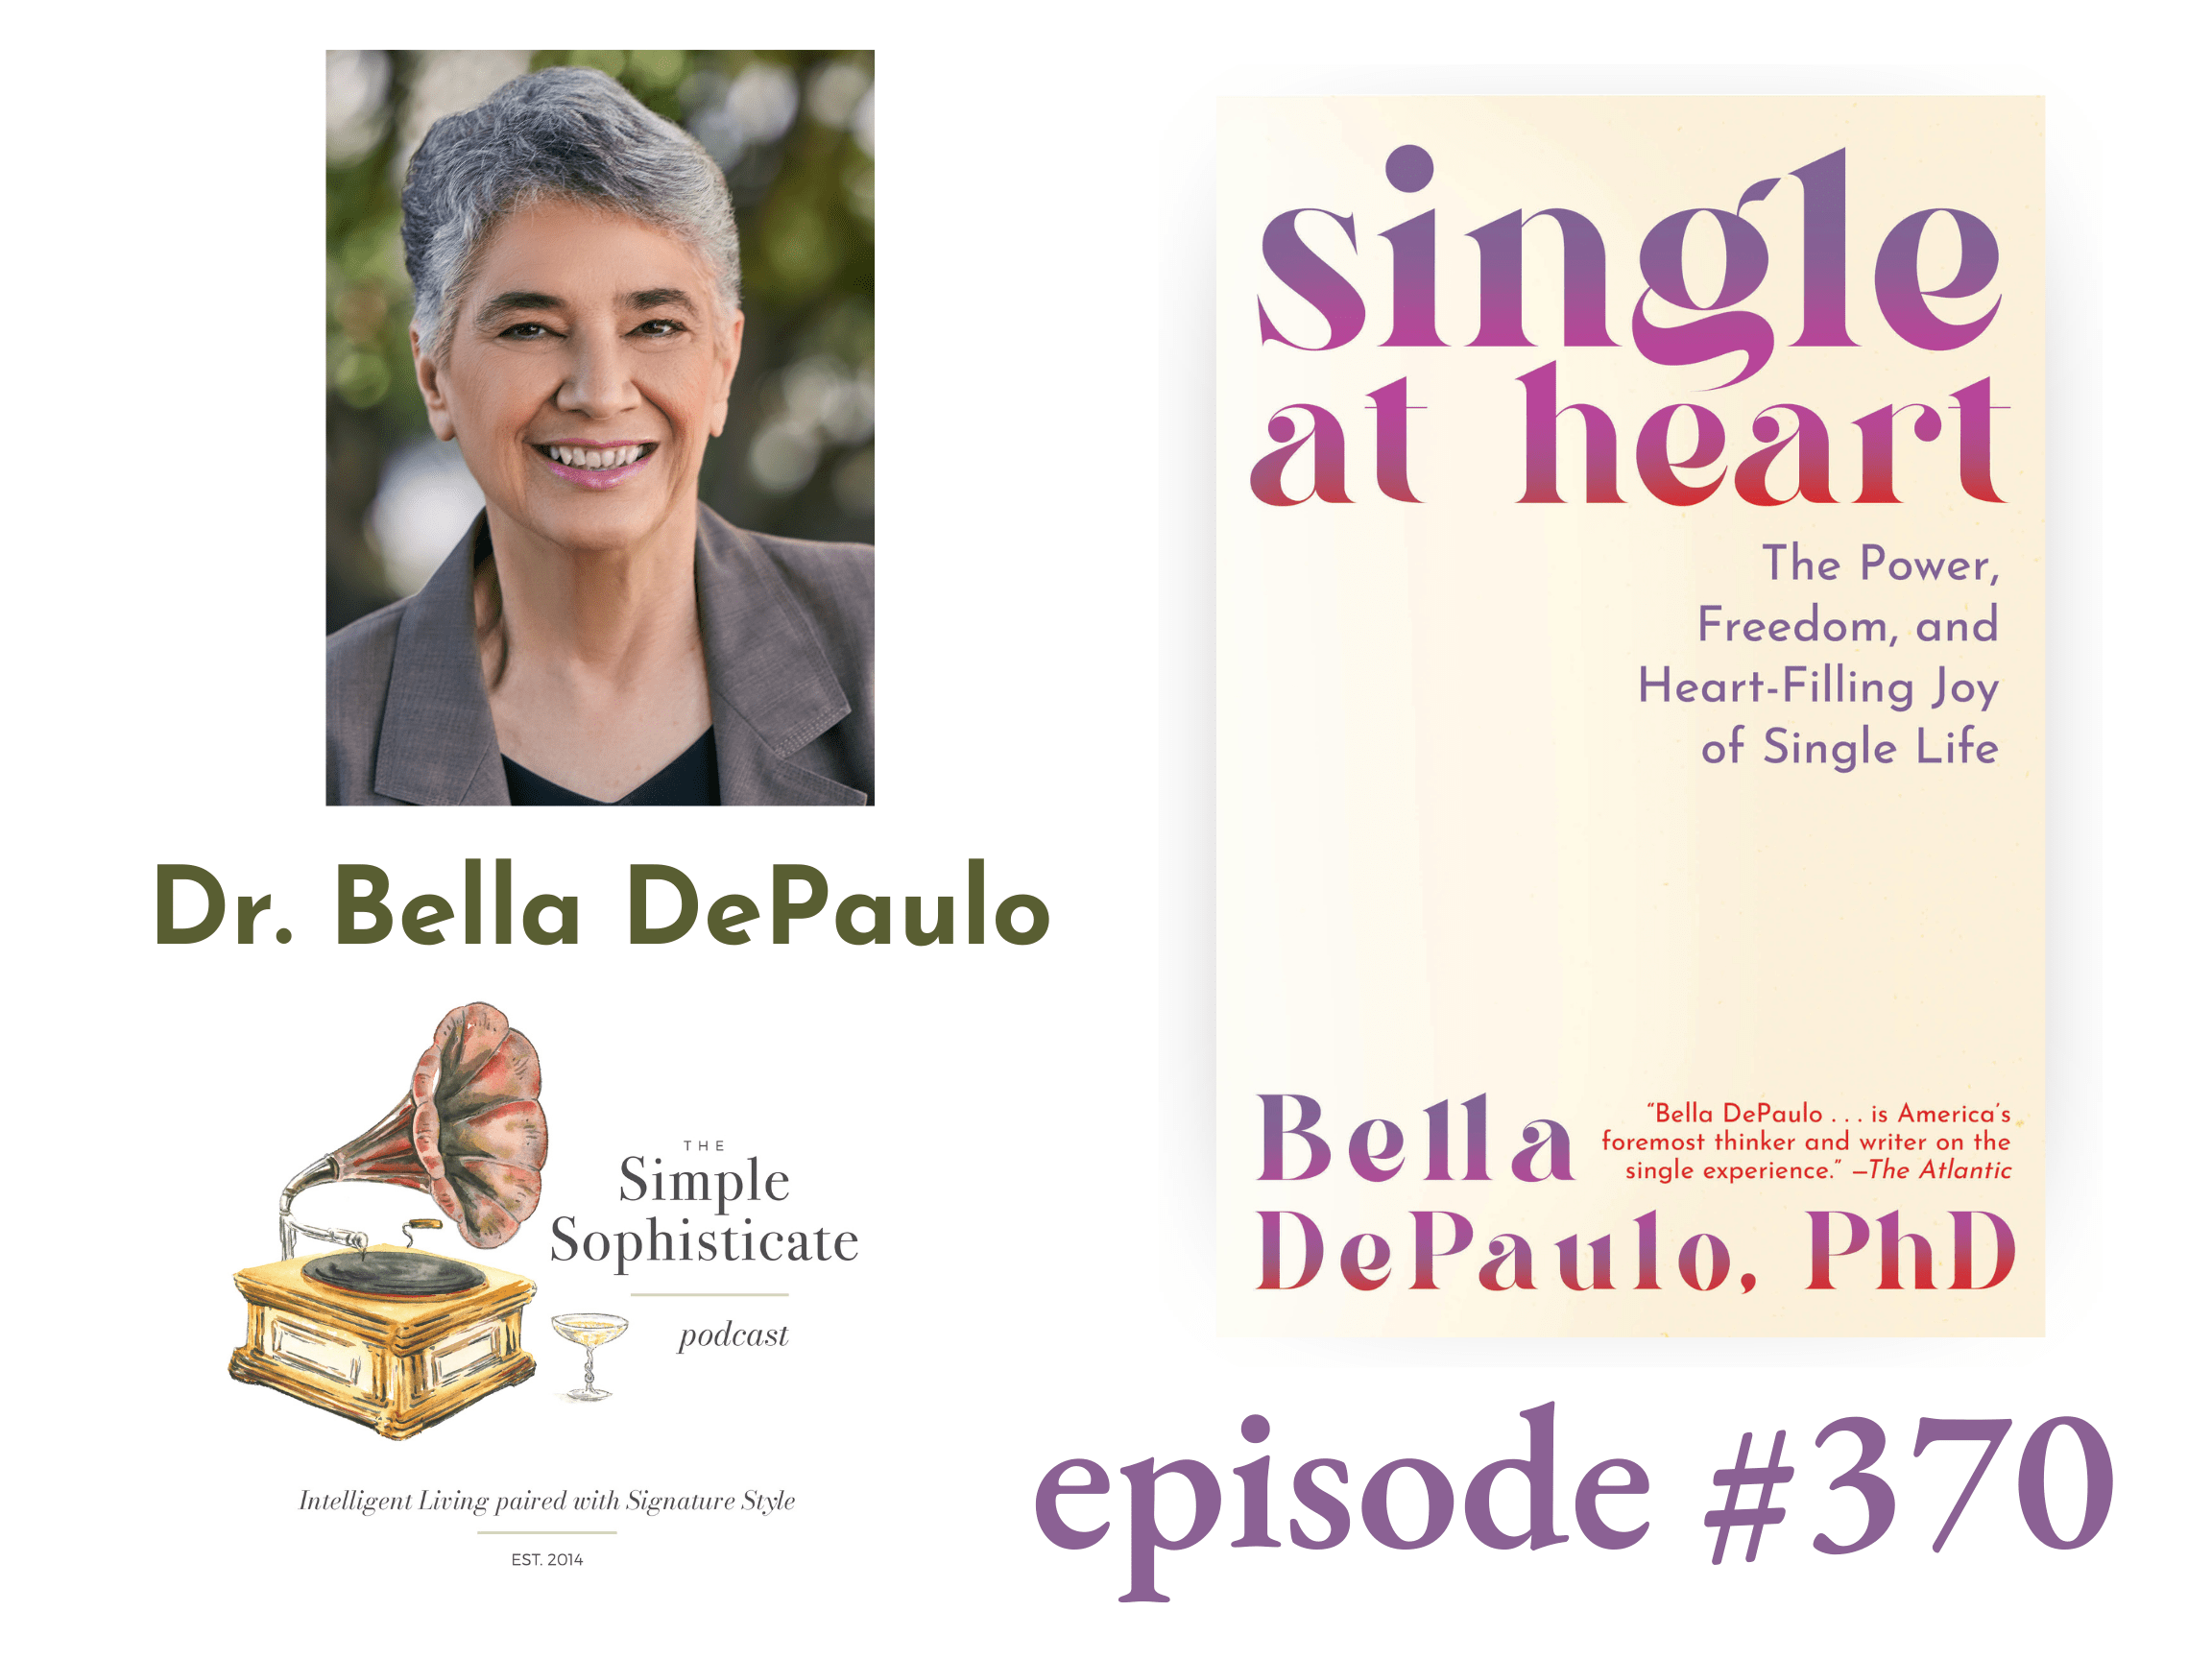 370: Savoring the Many Benefits of Being Single at Heart, my talk with author Dr. Bella DePaulo